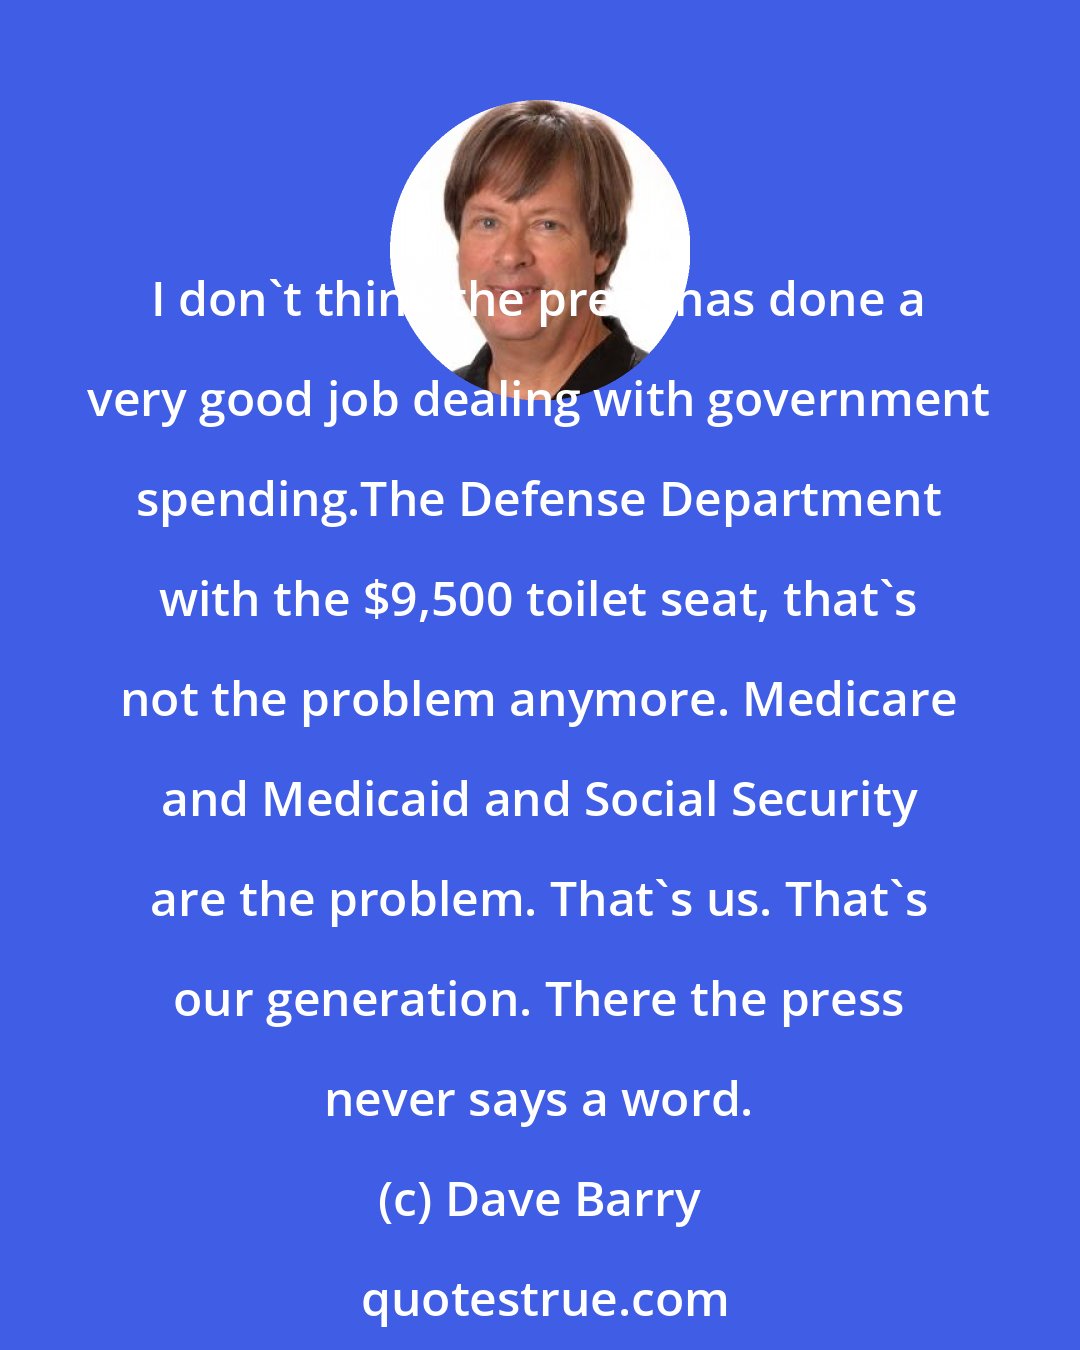 Dave Barry: I don't think the press has done a very good job dealing with government spending.The Defense Department with the $9,500 toilet seat, that's not the problem anymore. Medicare and Medicaid and Social Security are the problem. That's us. That's our generation. There the press never says a word.